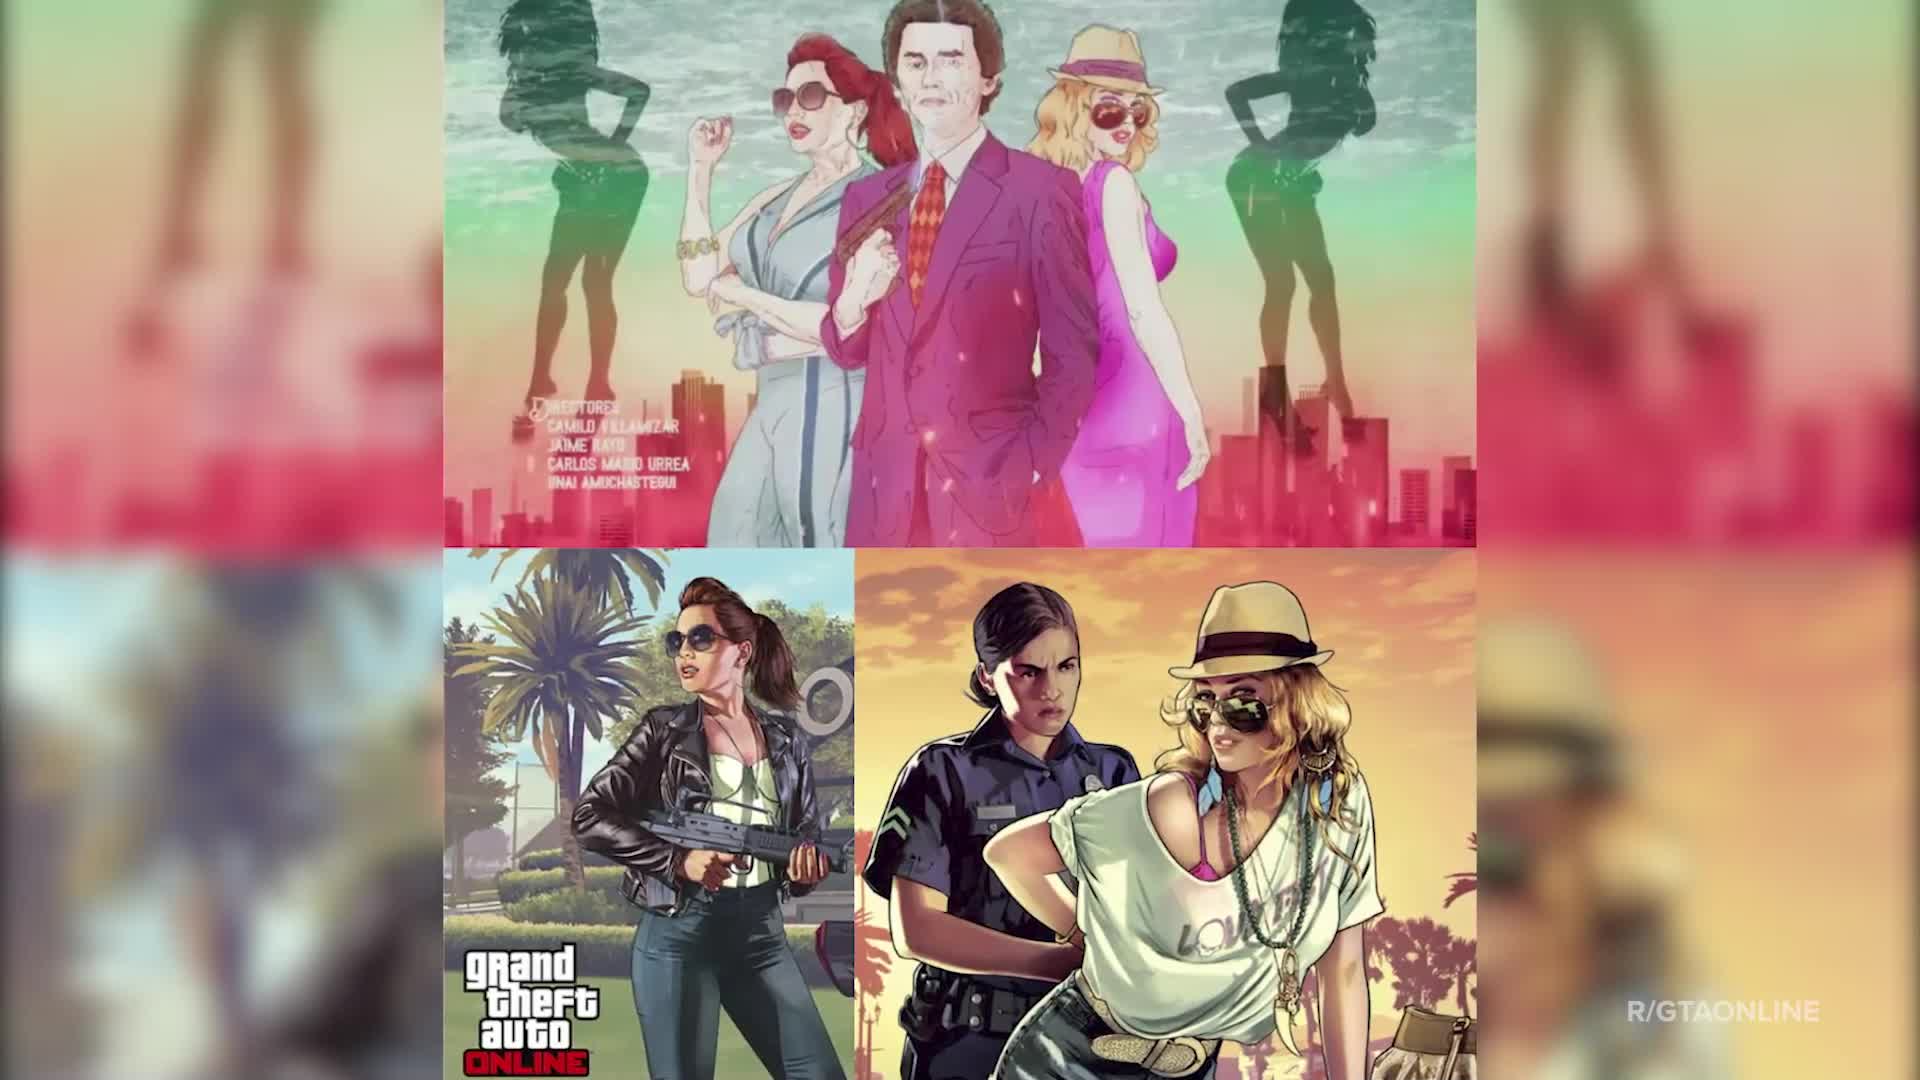 New netflix show accused of stealing GTA’s art